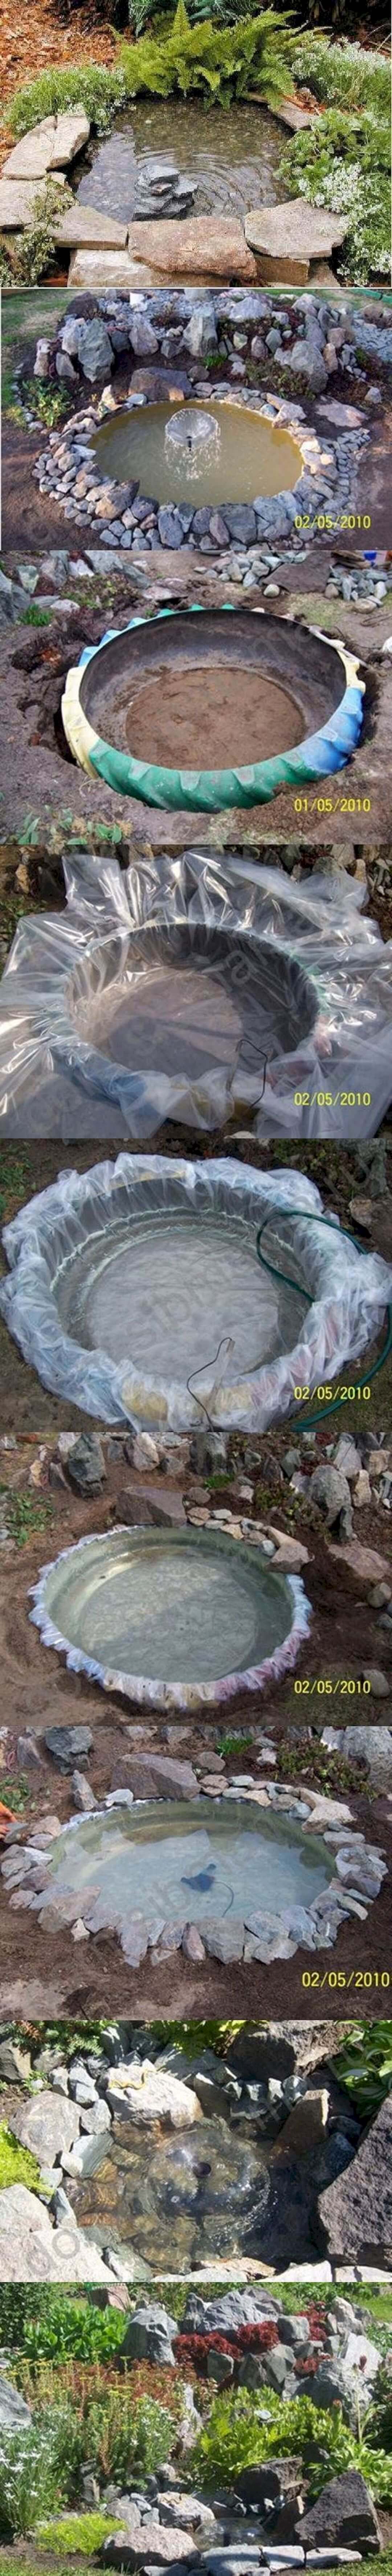 Inexpensive Rock Lined Tire Pond